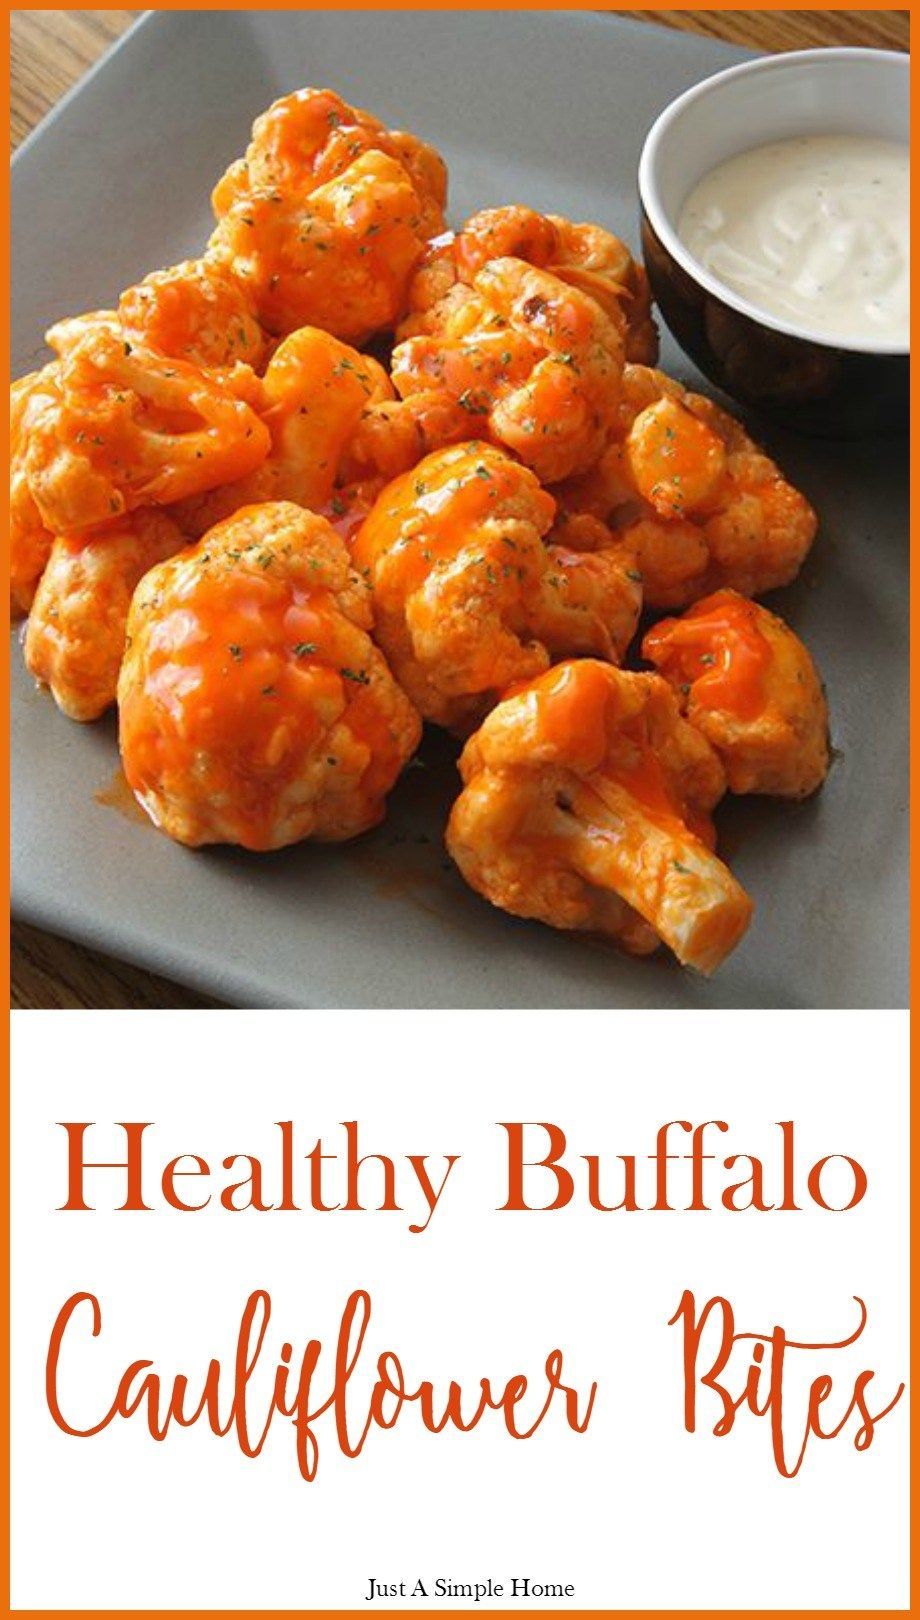 Healthy Buffalo Cauliflower Bites - Just A Simple Home -   18 healthy recipes On The Go clean eating ideas